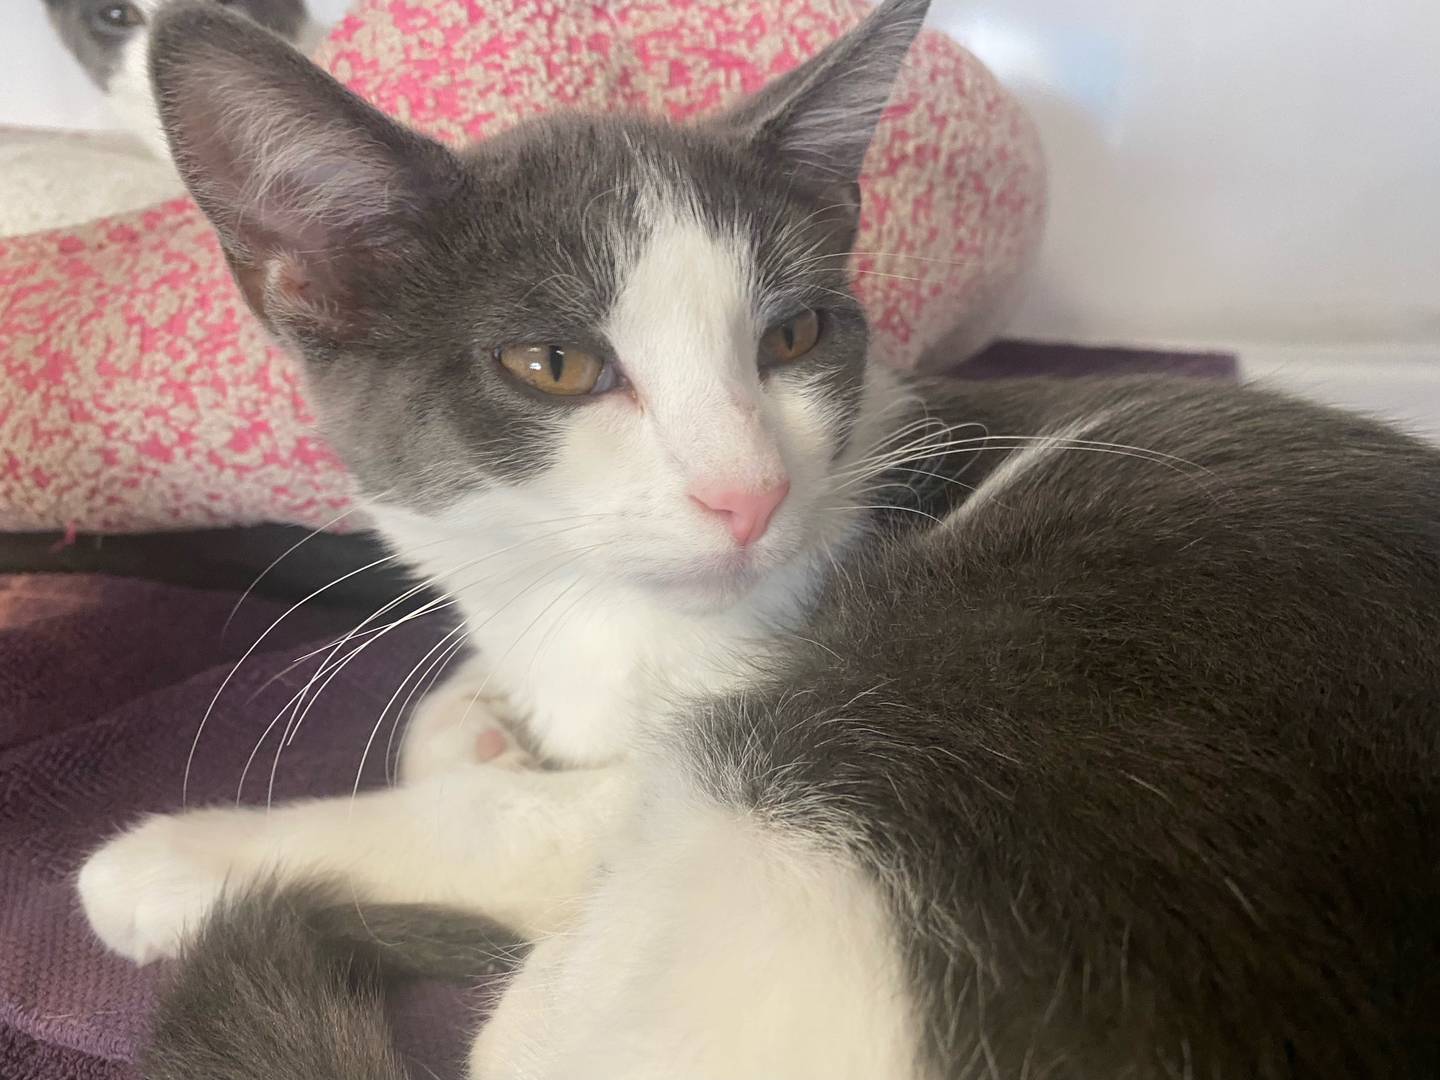 5-month-old Mason is outgoing and curious. He adores playing with the other cats, but does indulge in relaxation. For more on Mason, including adoption fees please visit justanimals.org or call 815-448-2510.